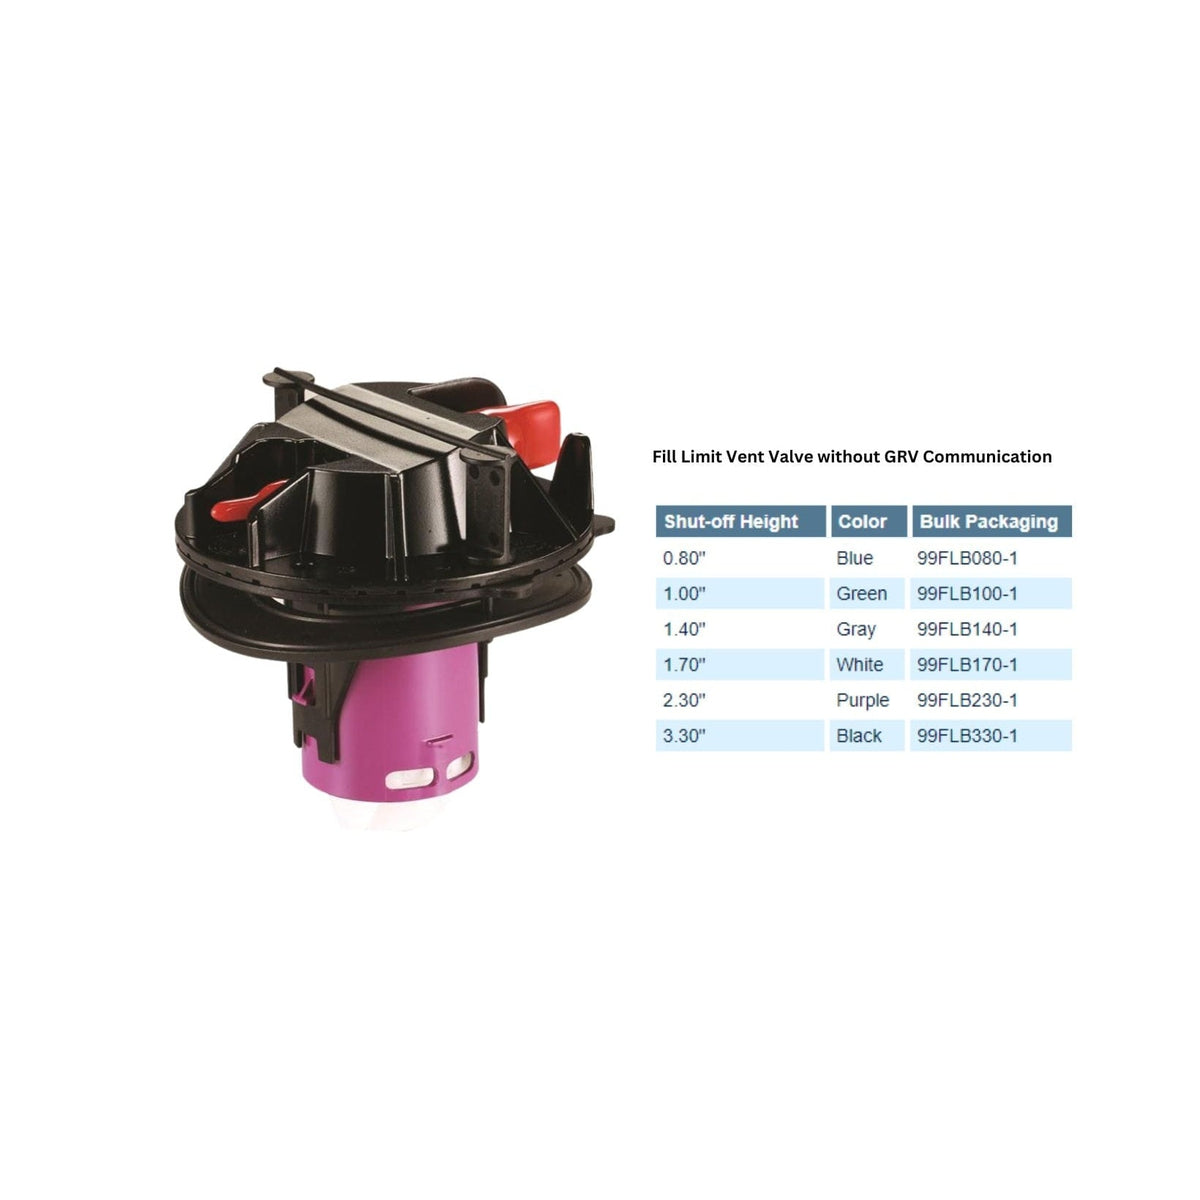 Attwood Marine Qualifies for Free Shipping Attwood Fuel Limit Vent Valve 1.0 Green #99FLB100-1S